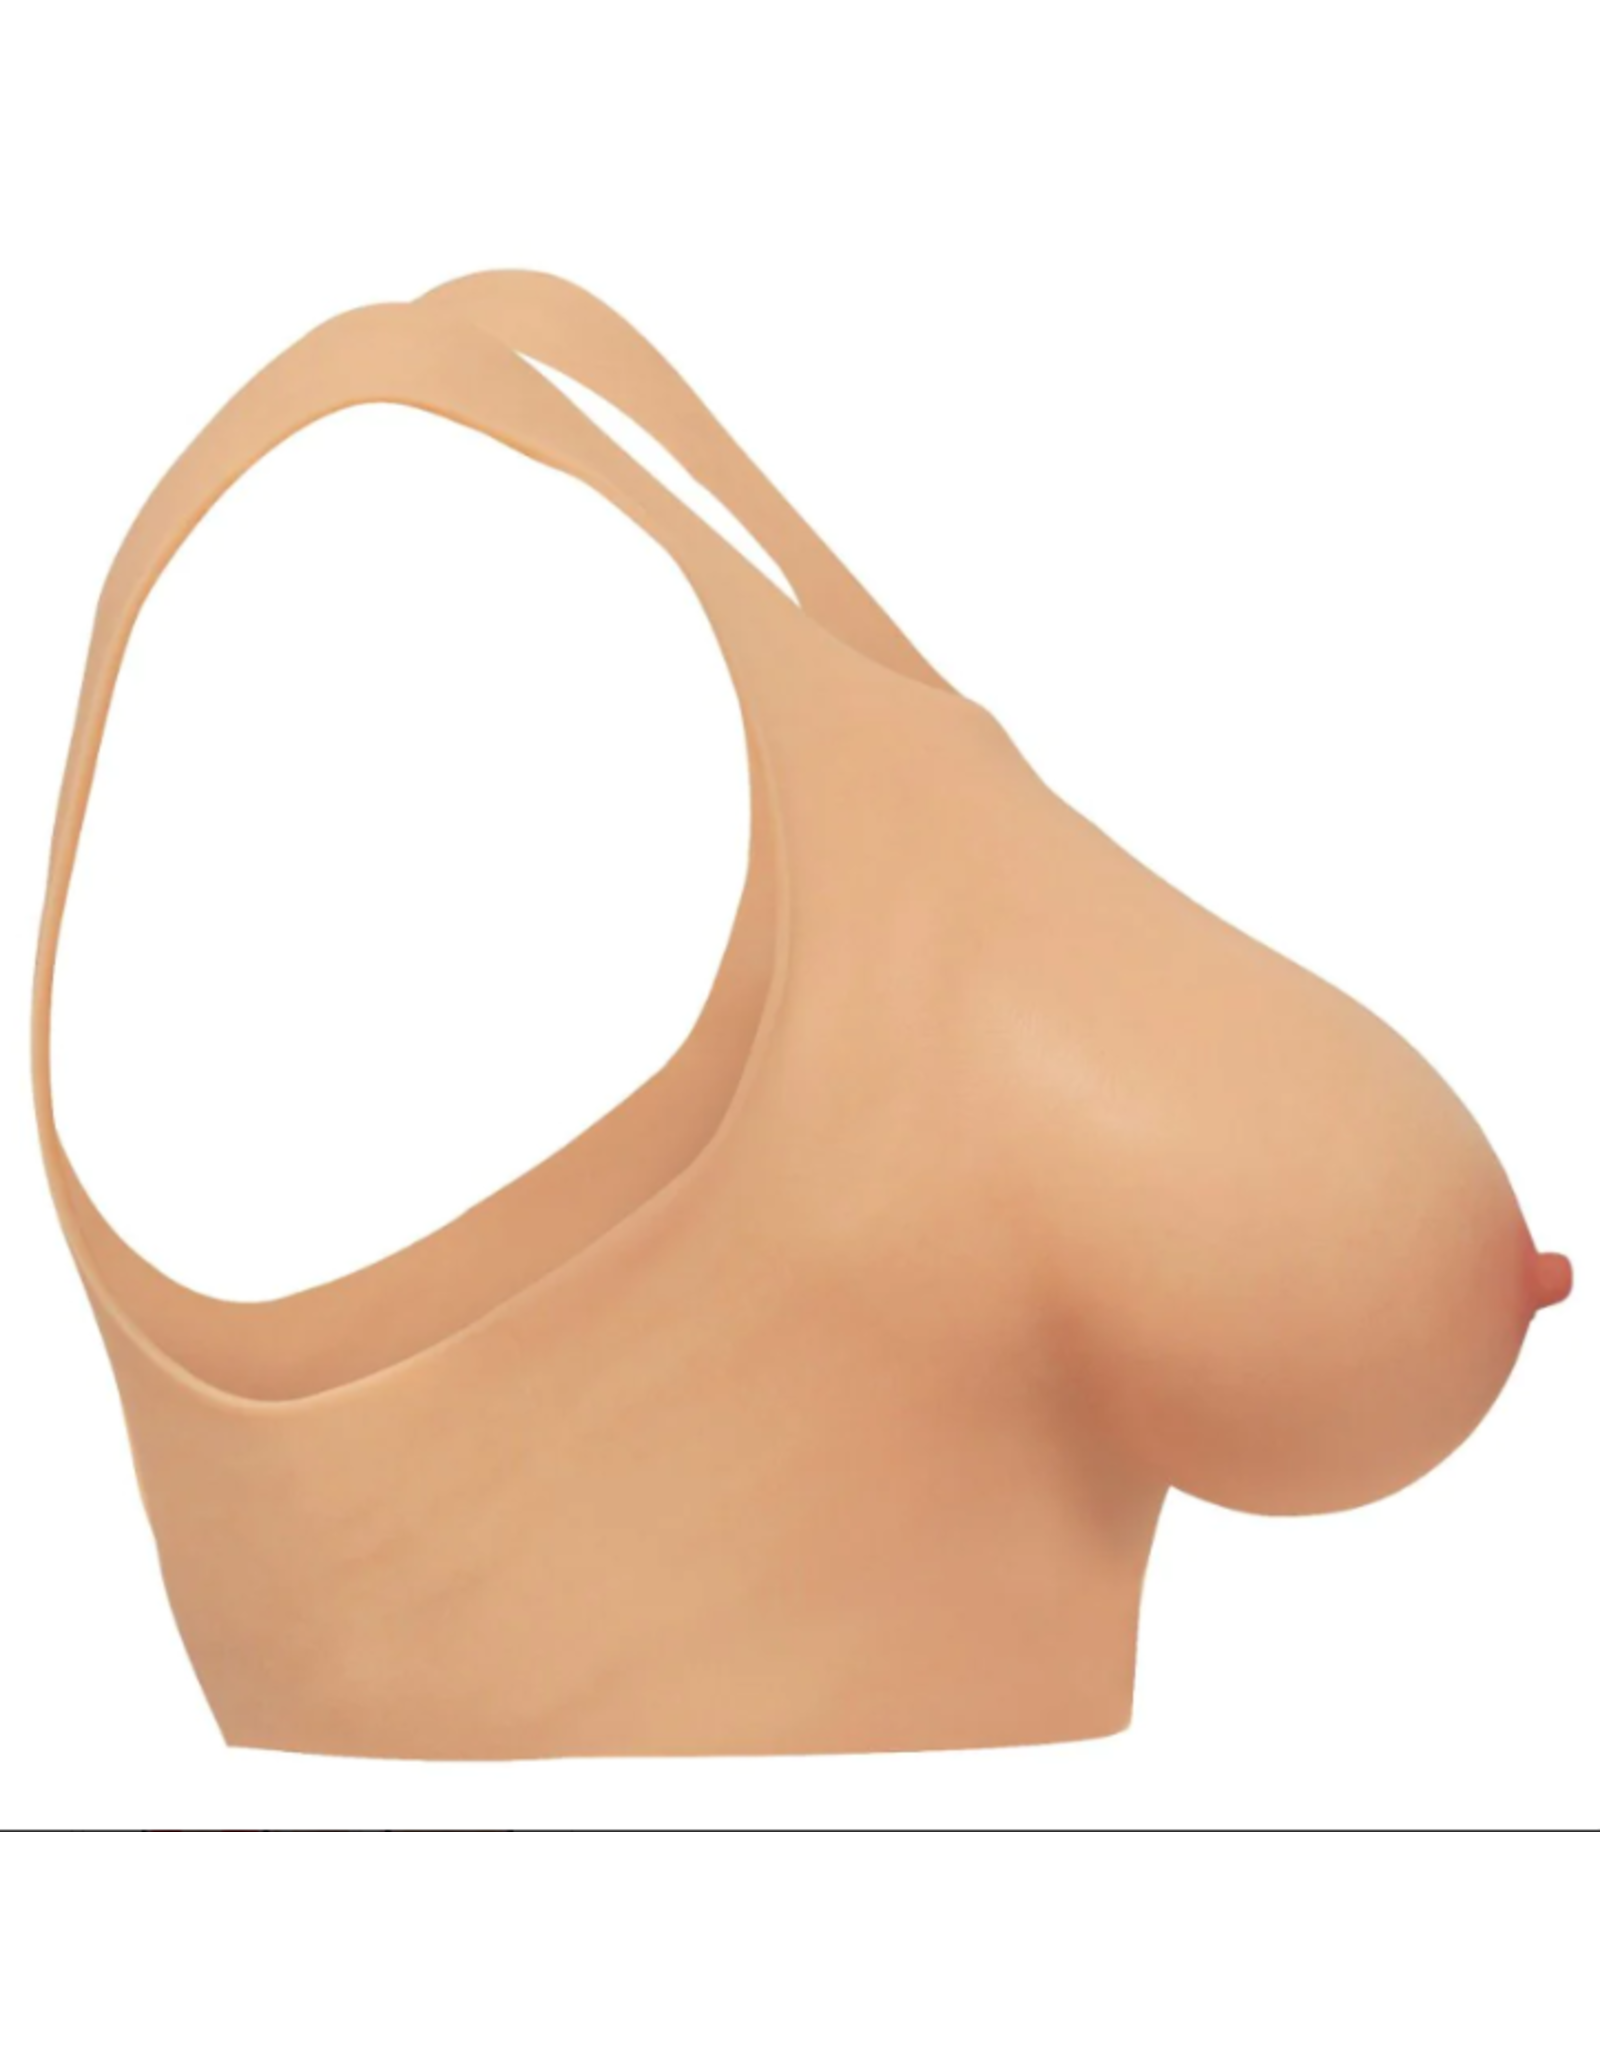 Master Series-Perky Pair D-Cup Silicone Breasts